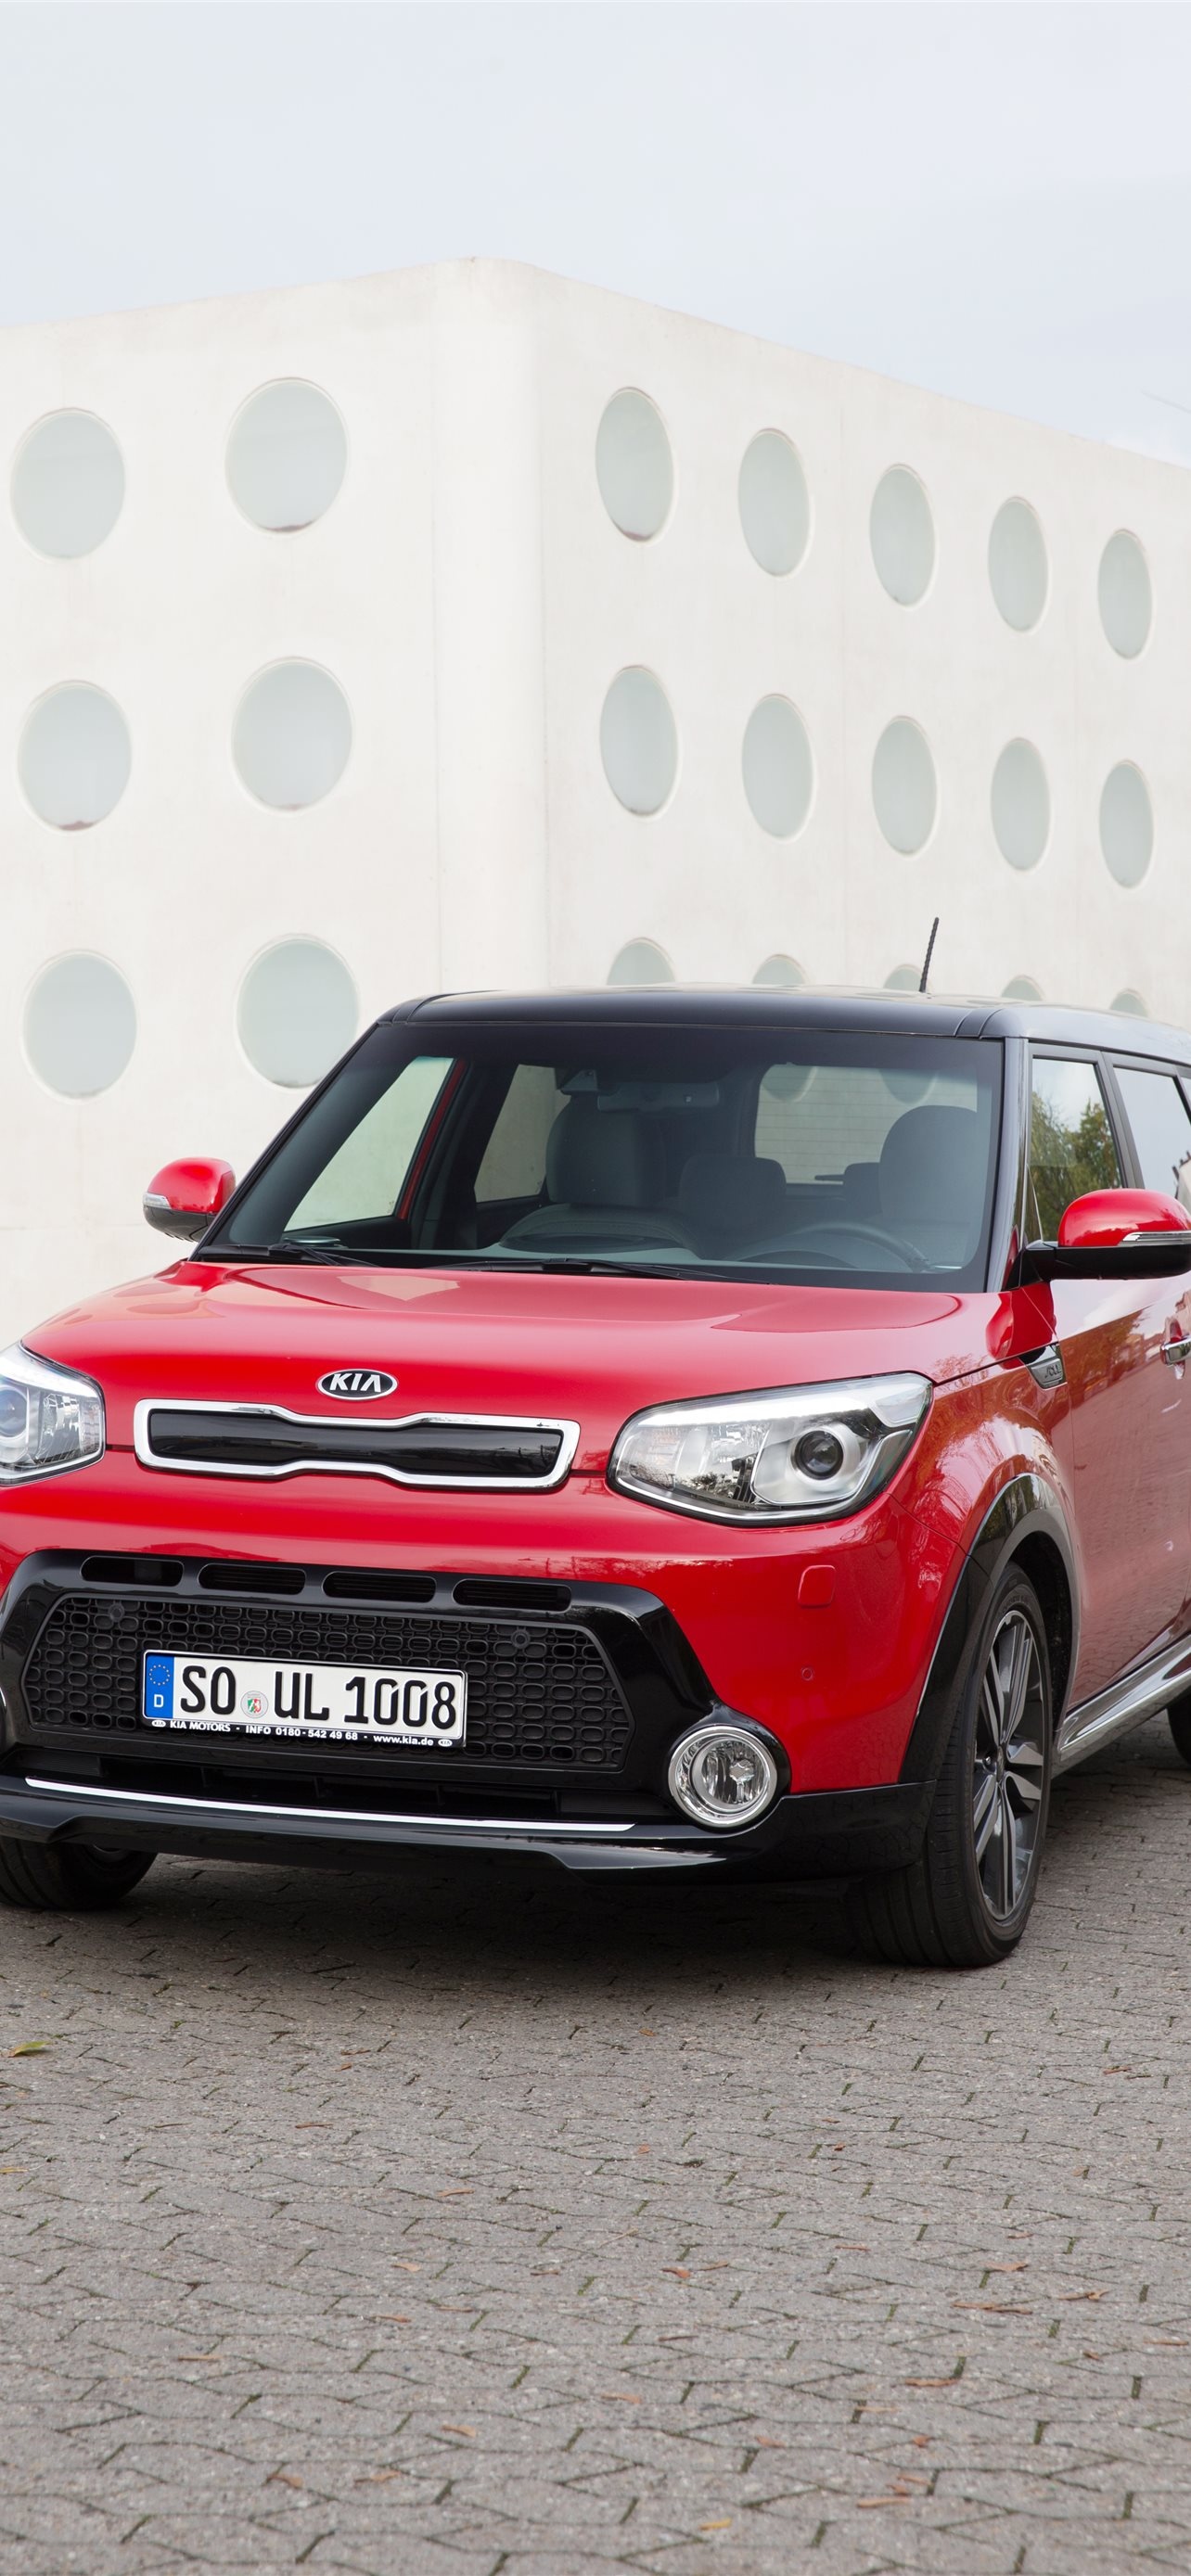 Kia Soul, iPhone wallpapers, Free and downloadable, Personalize your device, 1290x2780 HD Phone